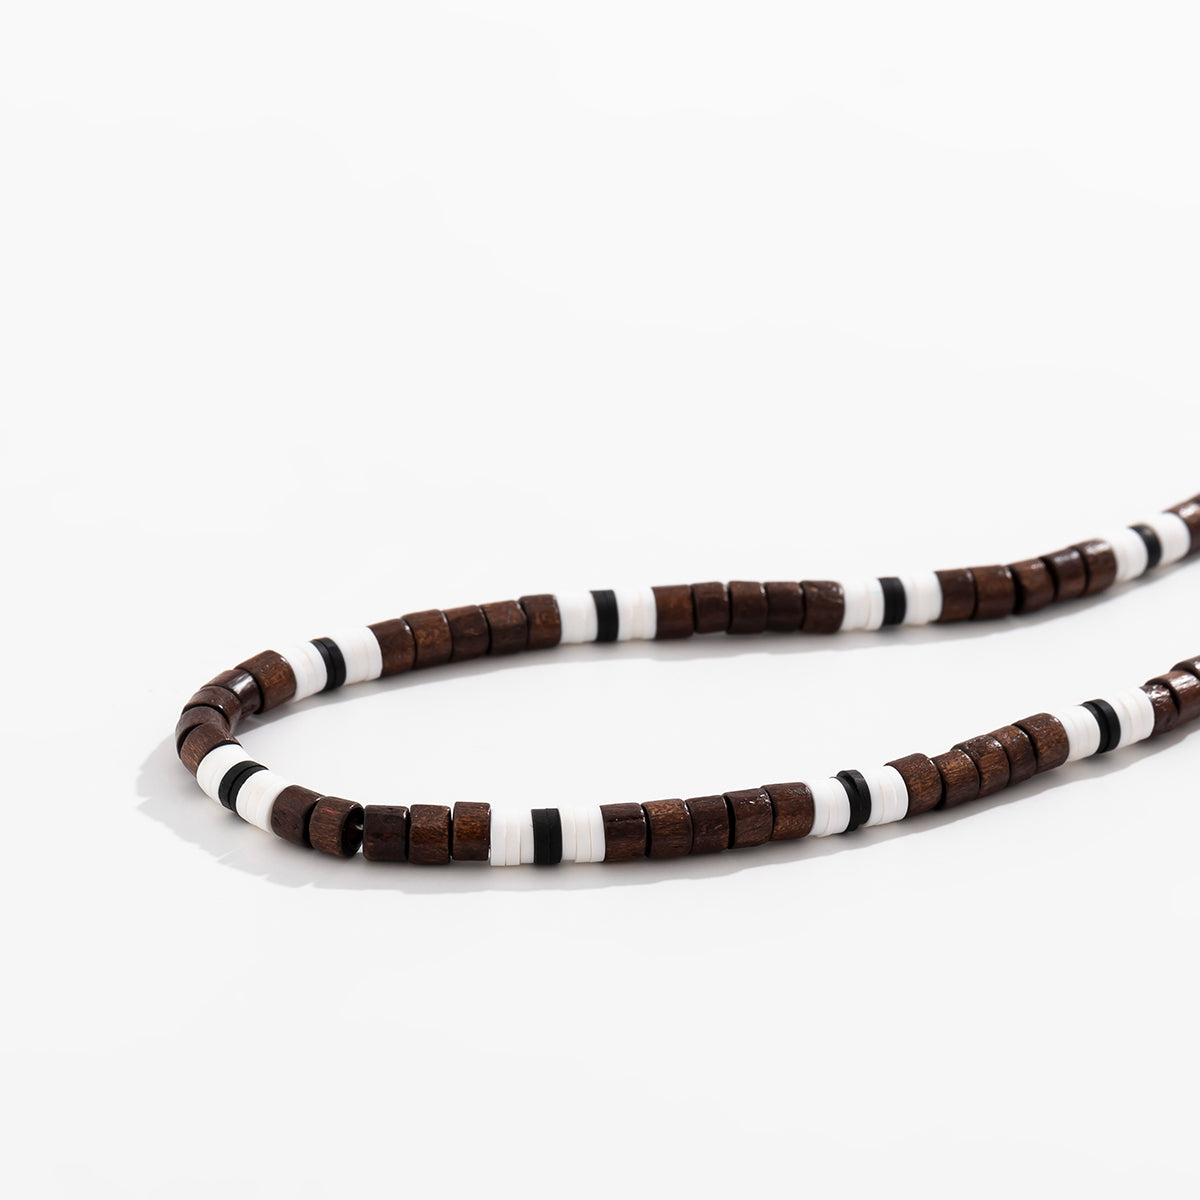 Men’s Wooden Beaded Surfer Necklace African Bead Beach Necklace Brown